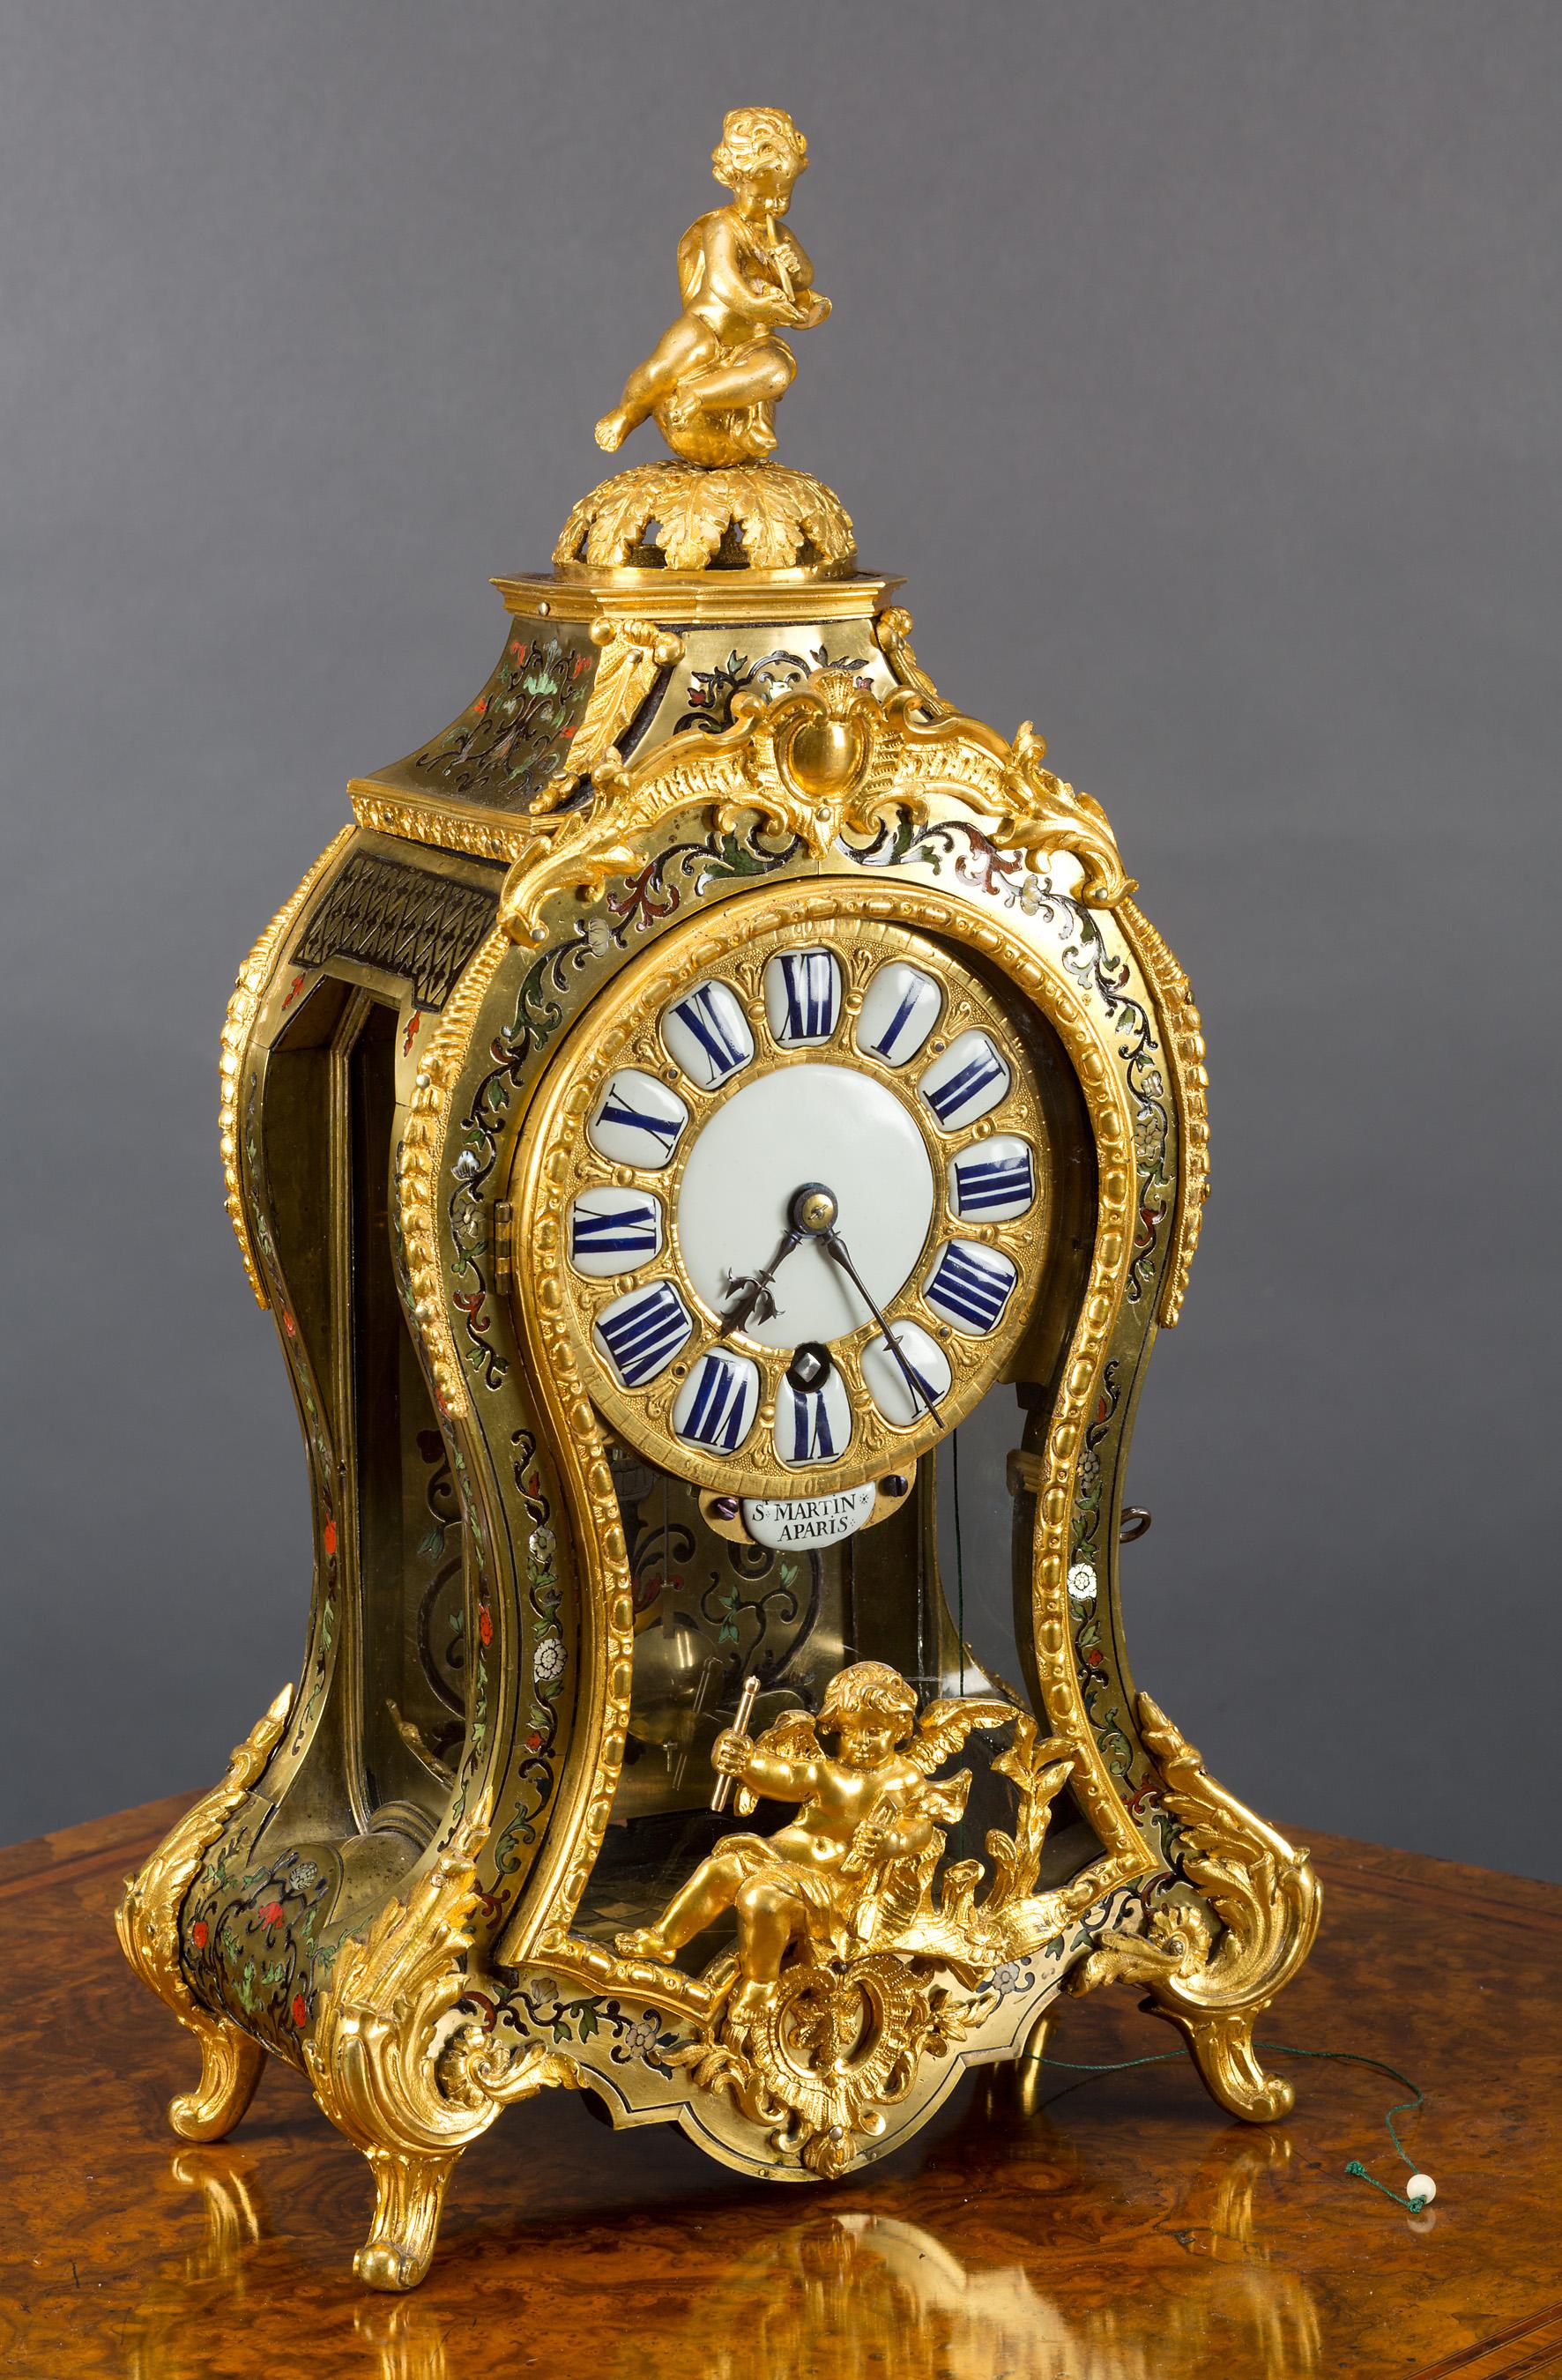 Louis XV tortoiseshell Boulle Timepiece with ‘Silent’ pull quarter repeat by St. Martin, Paris, circa 1720

Waisted case with fine ormolu mounts and cut brass inlay to the stained tortoiseshell with ‘mother of pearl’ and coloured floral